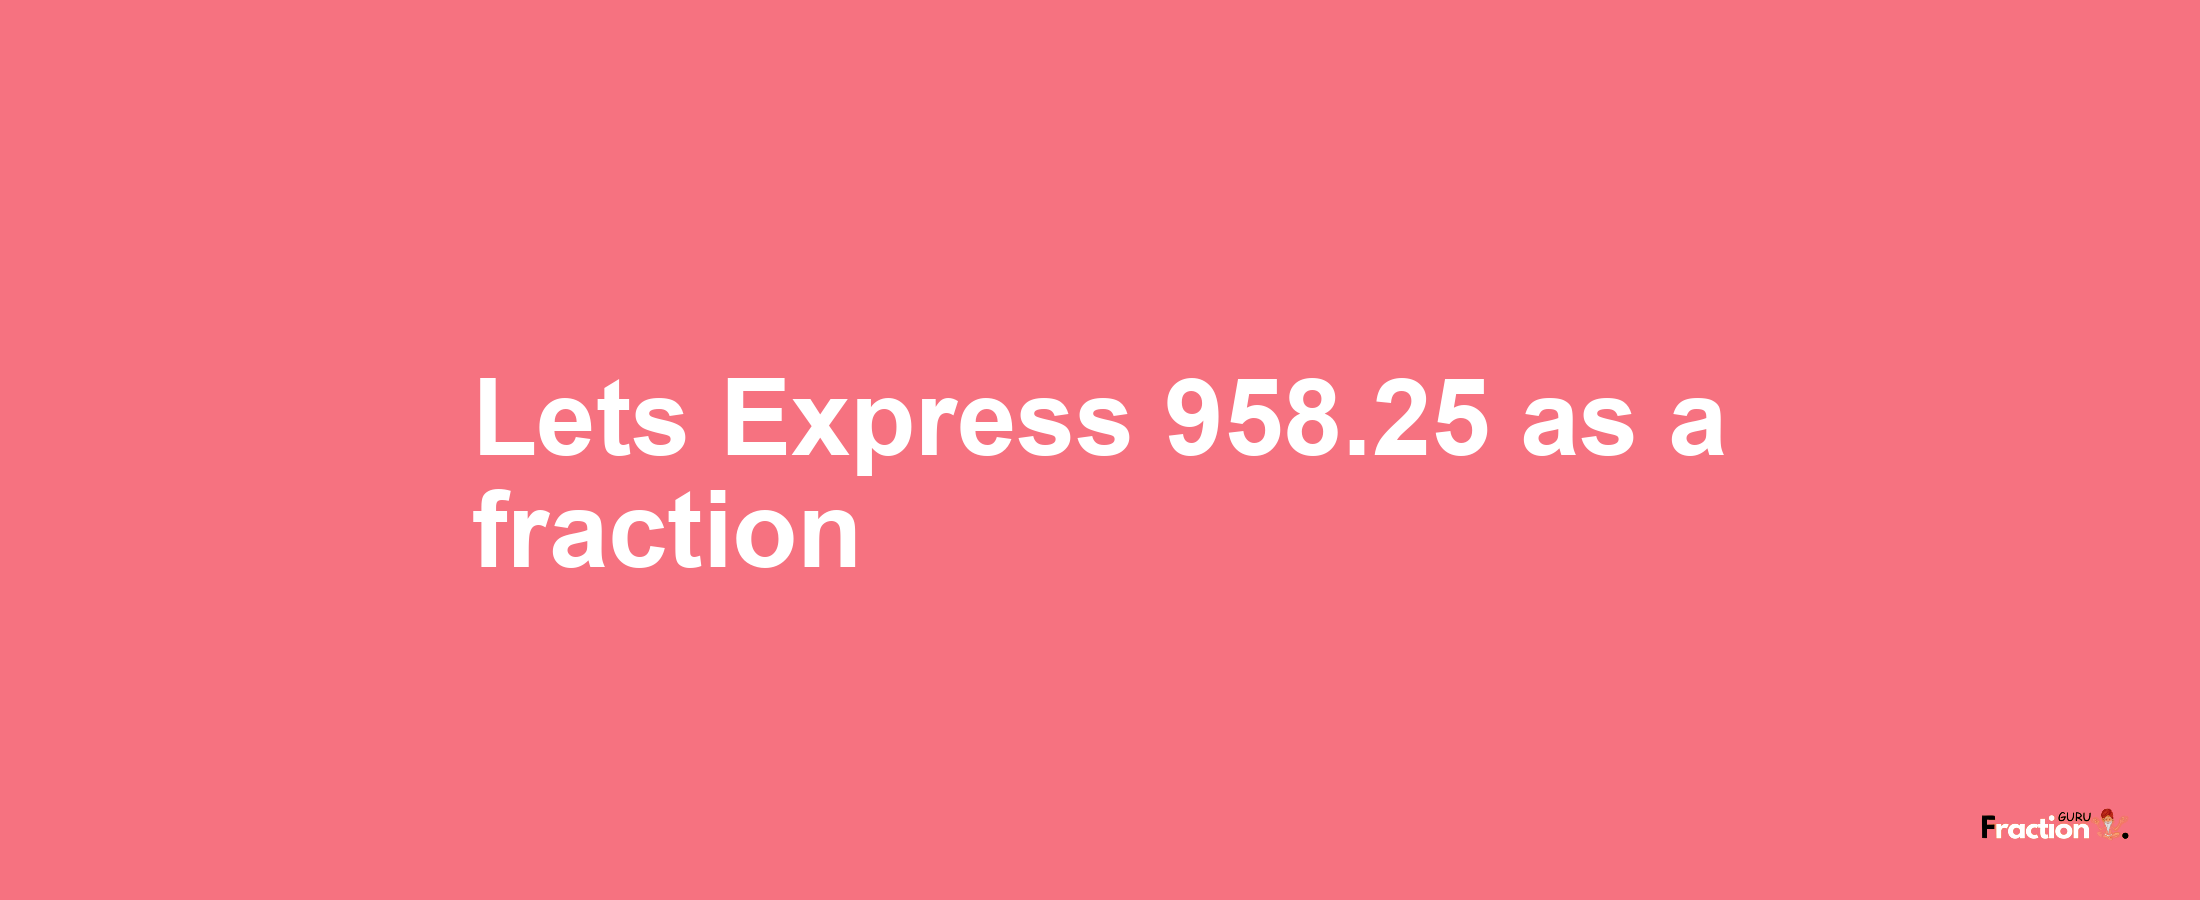 Lets Express 958.25 as afraction